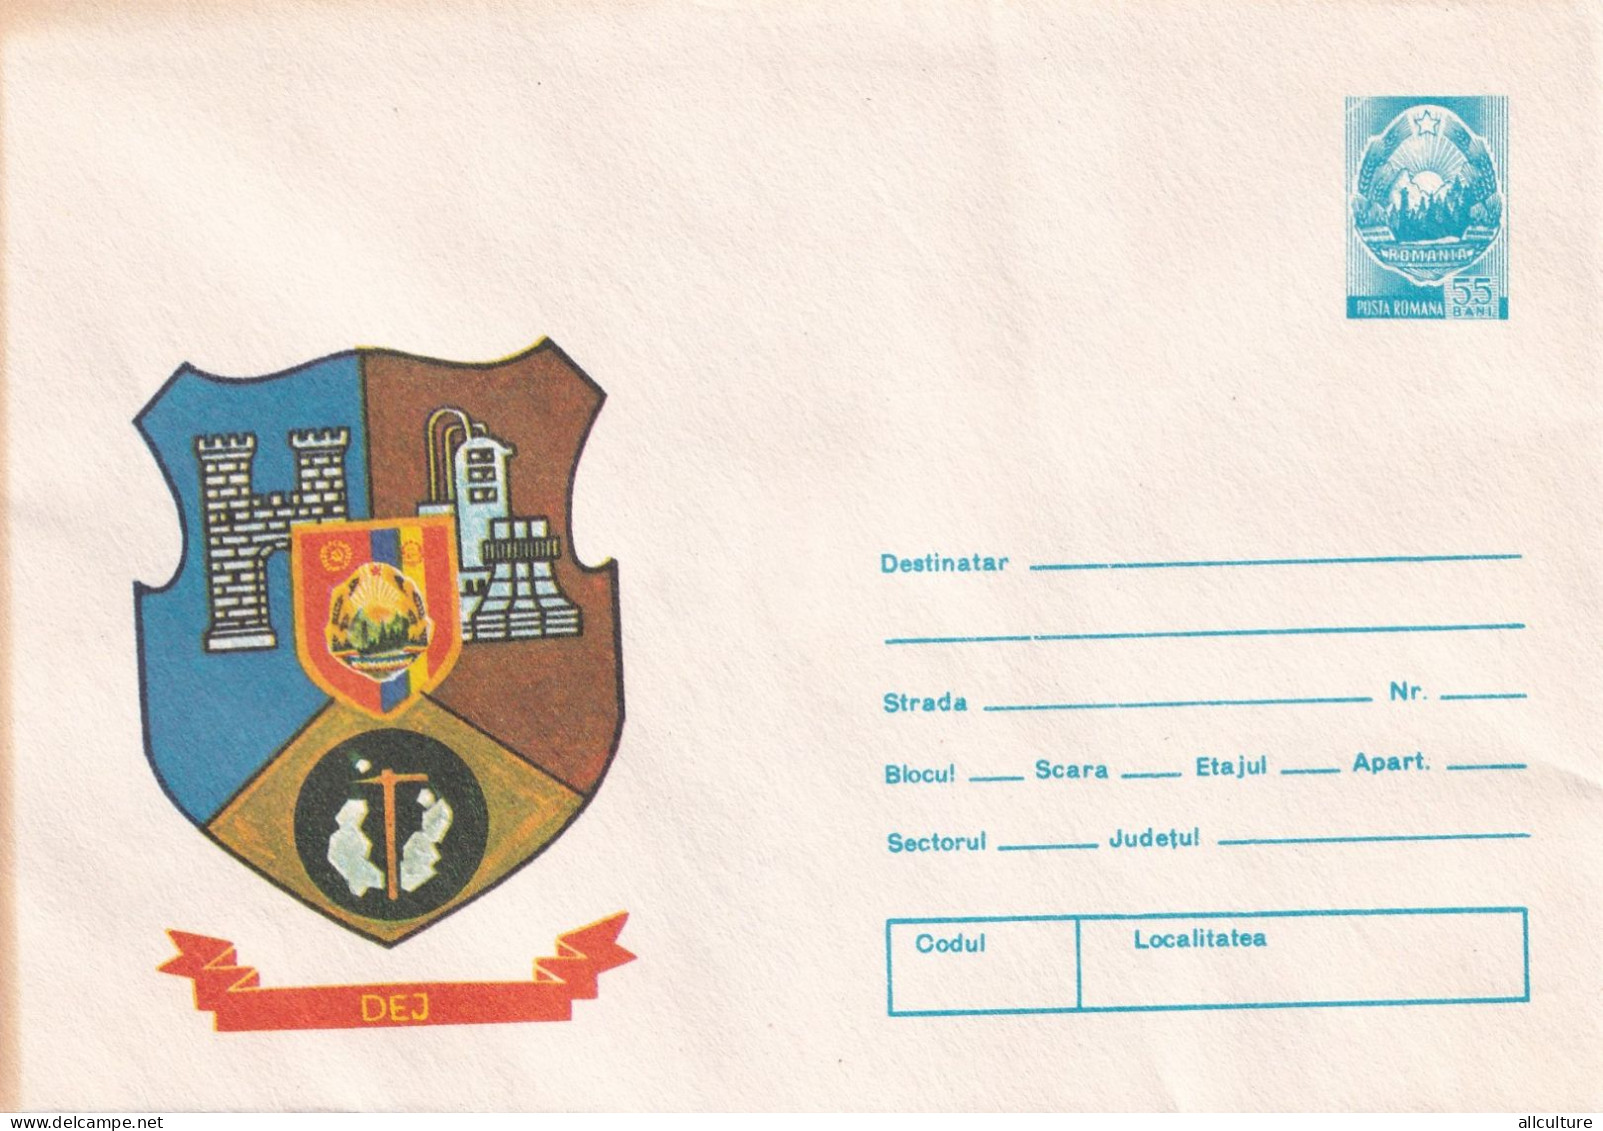 A24575 - DEJ Cover Stationery Perfect Shape Unused 1980 - Postal Stationery